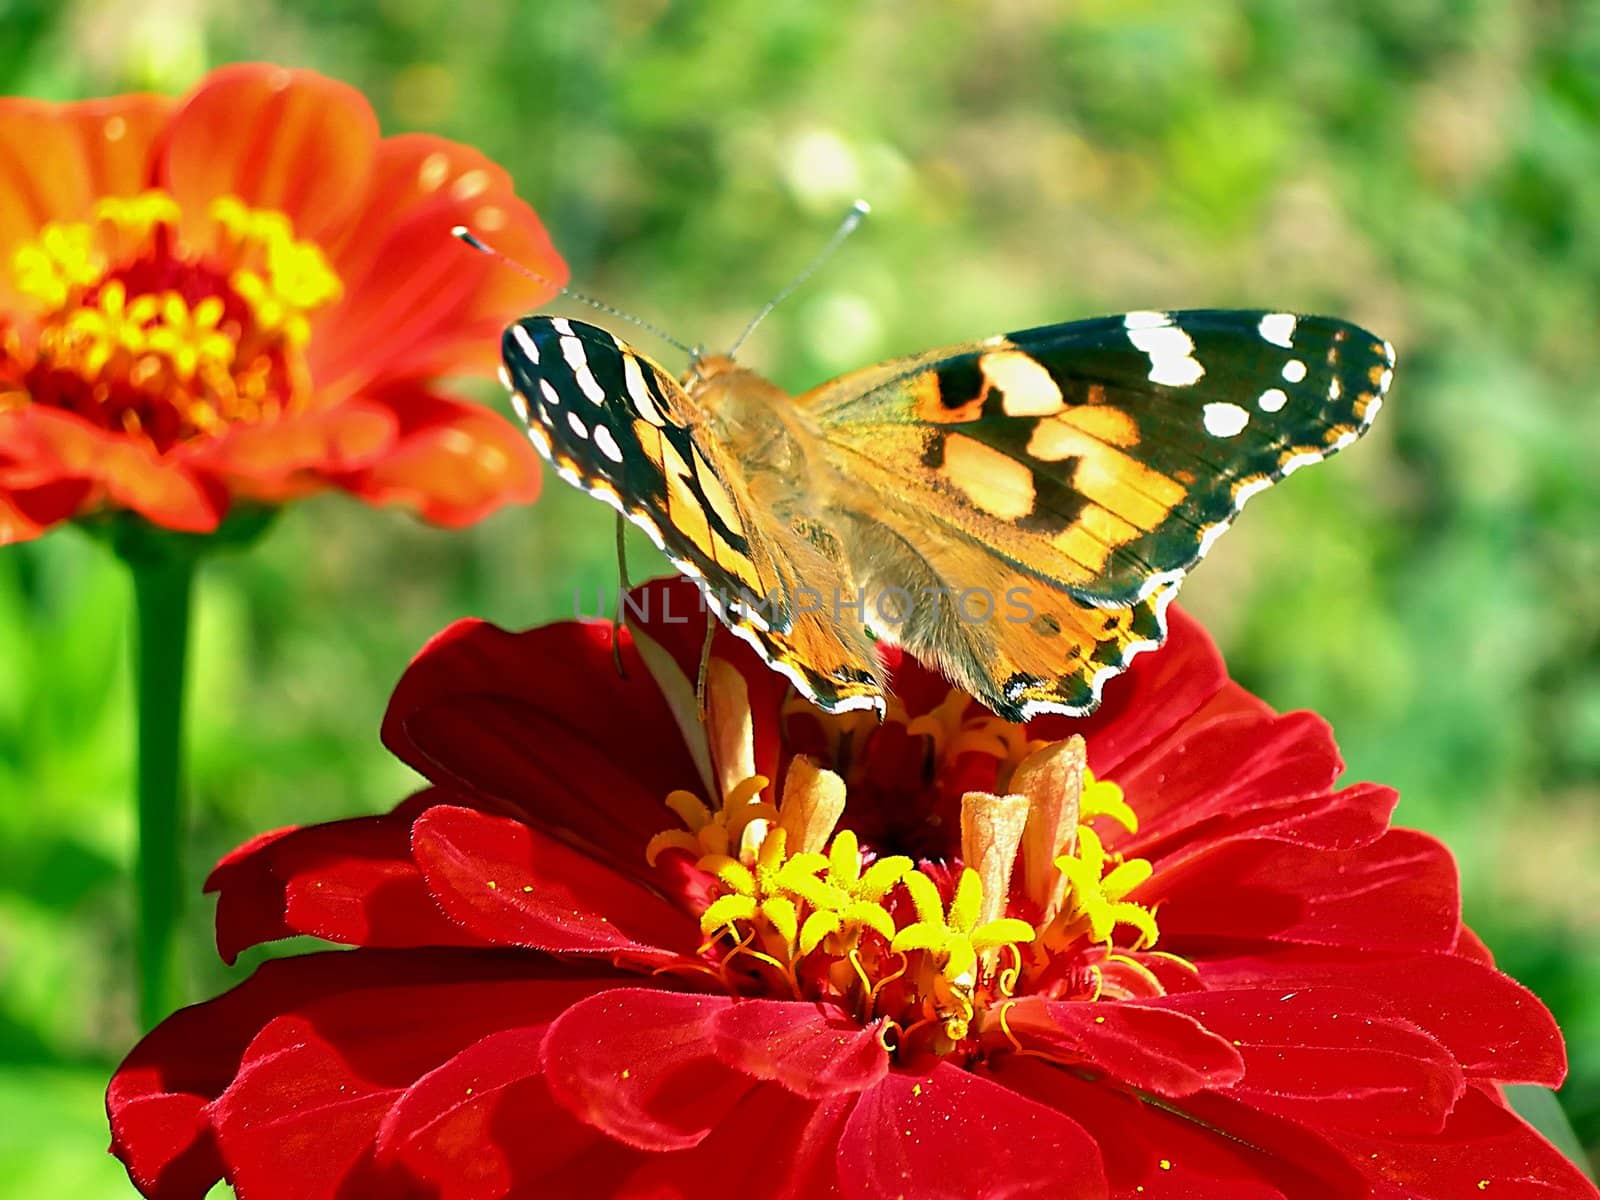        Butterfly on a red flower   